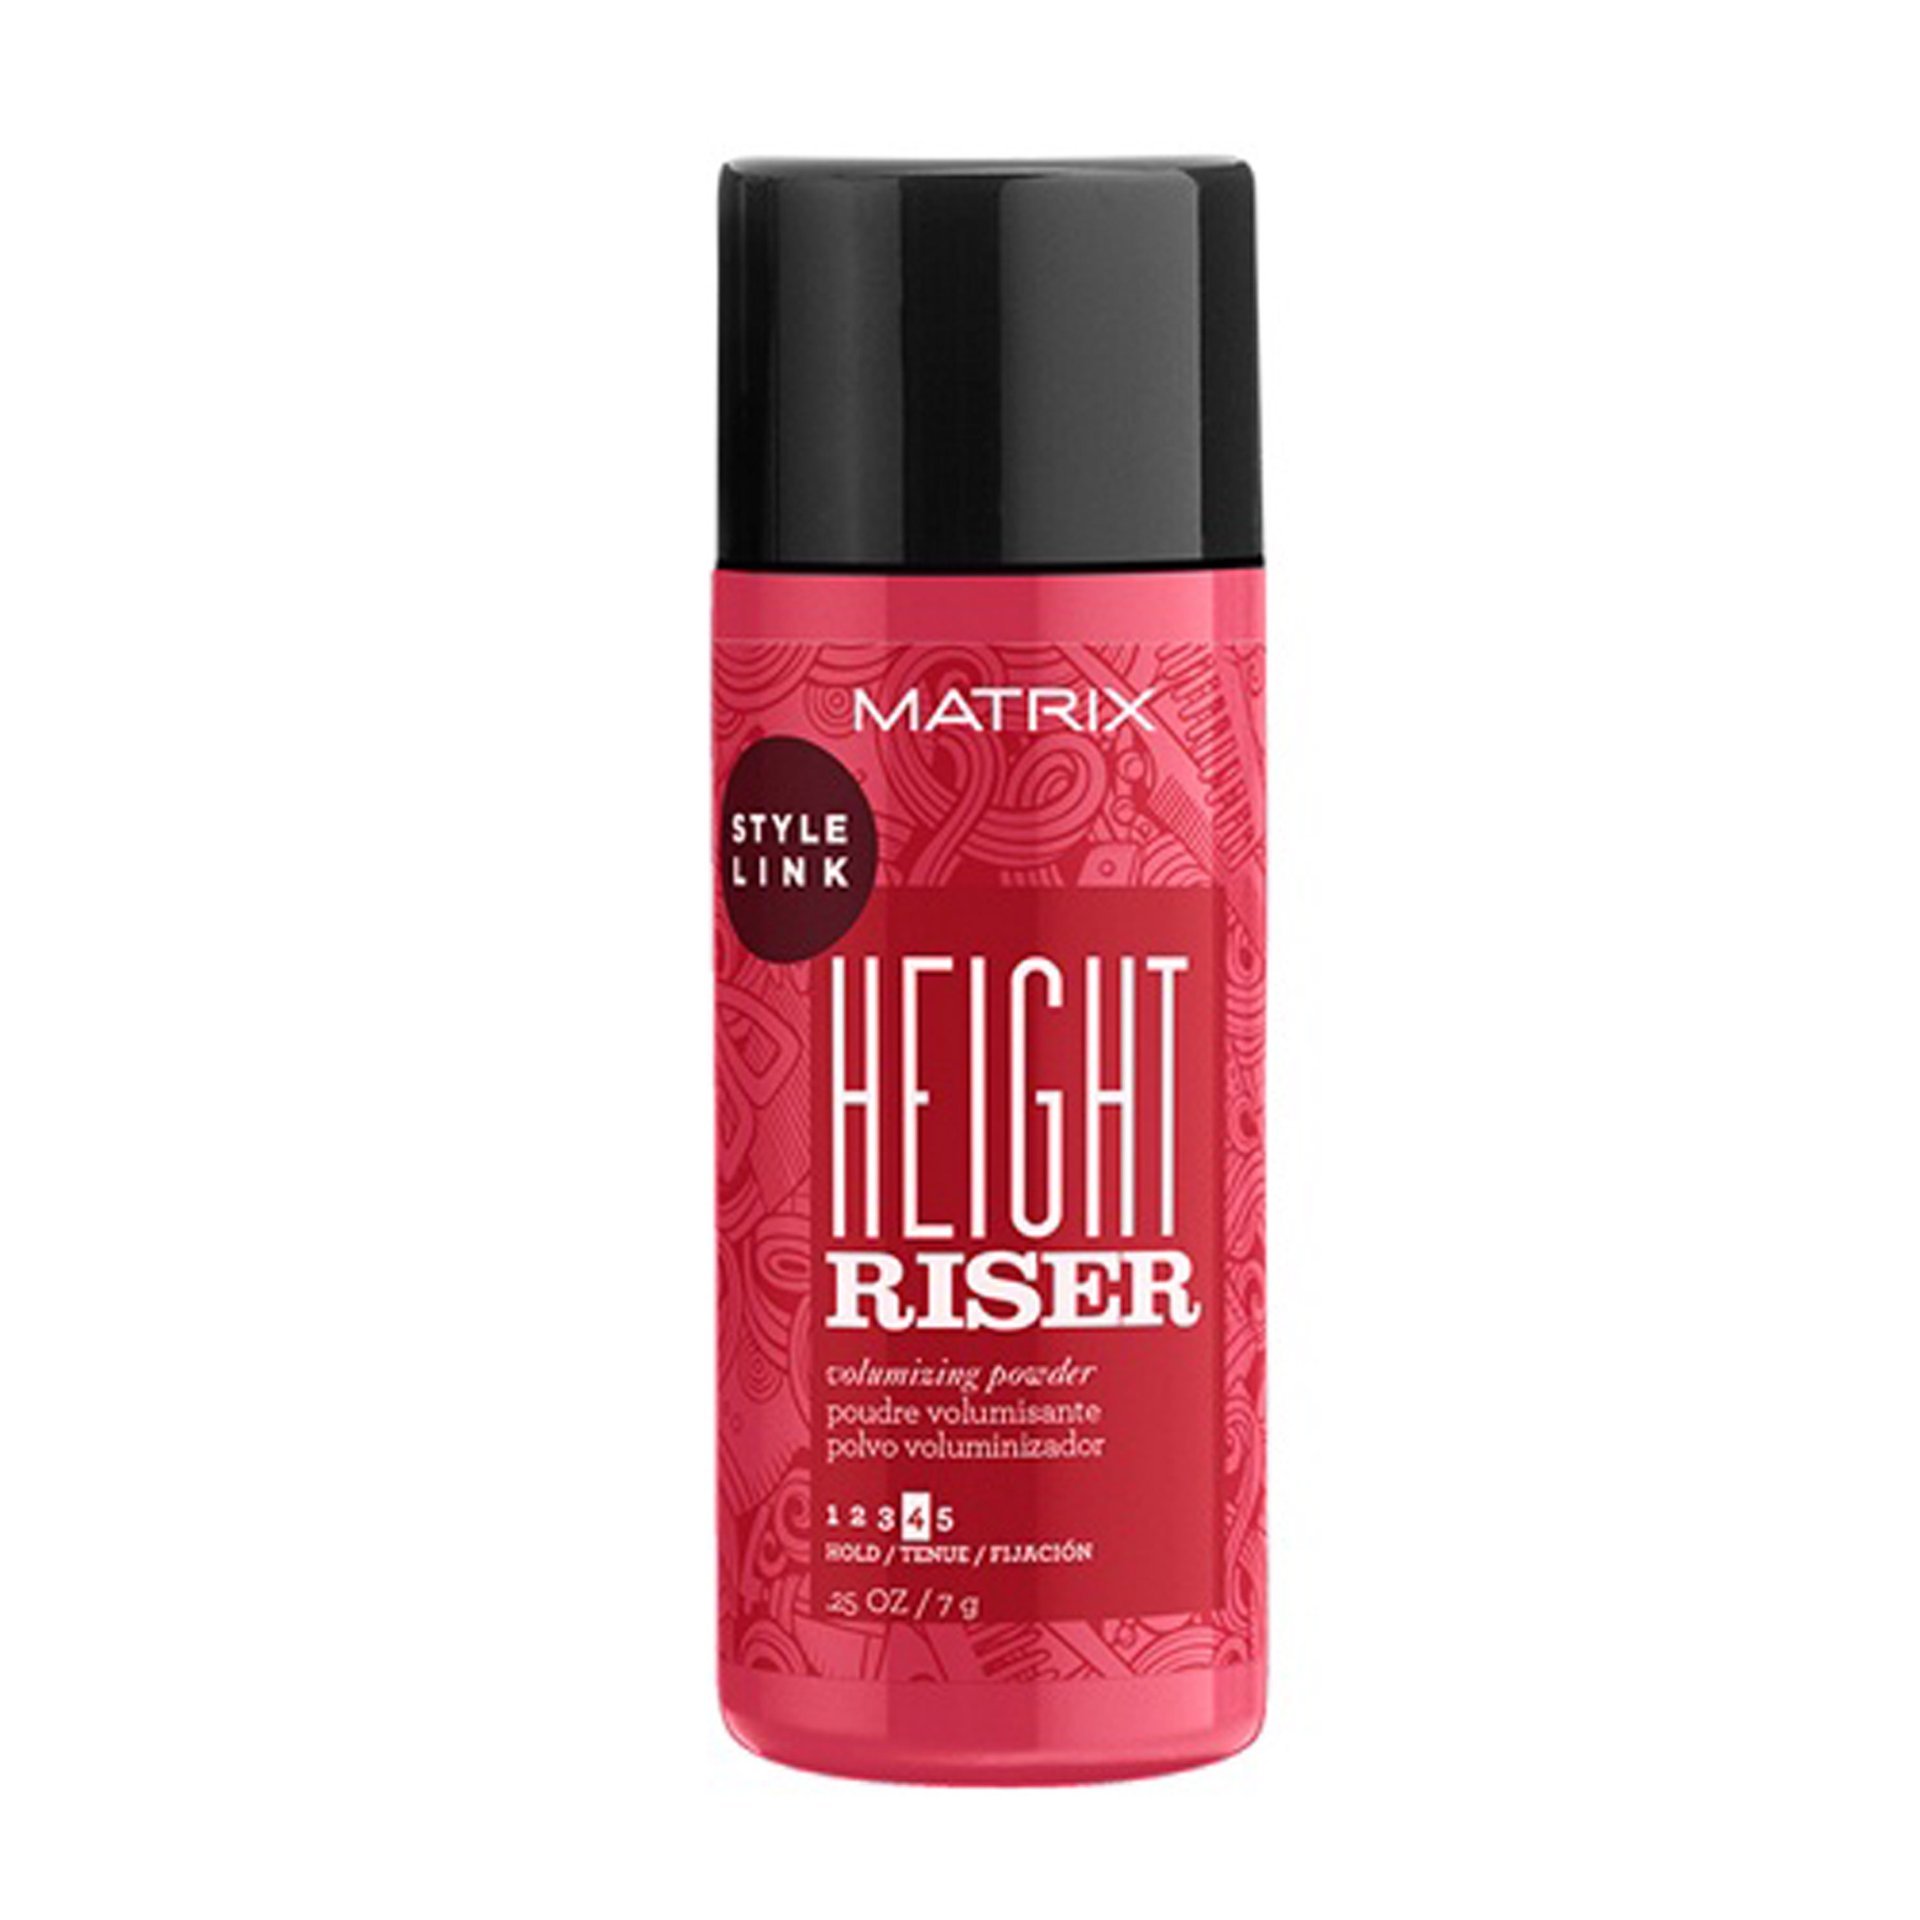 https://www.matrix.com/-/media/project/loreal/brand-sites/matrix/americas/us_usmx/product-information/product-images/hair-care-and-styling/product-images/height-riser.jpg?rev=c0c092f906ca4b4785834ddf435341ea